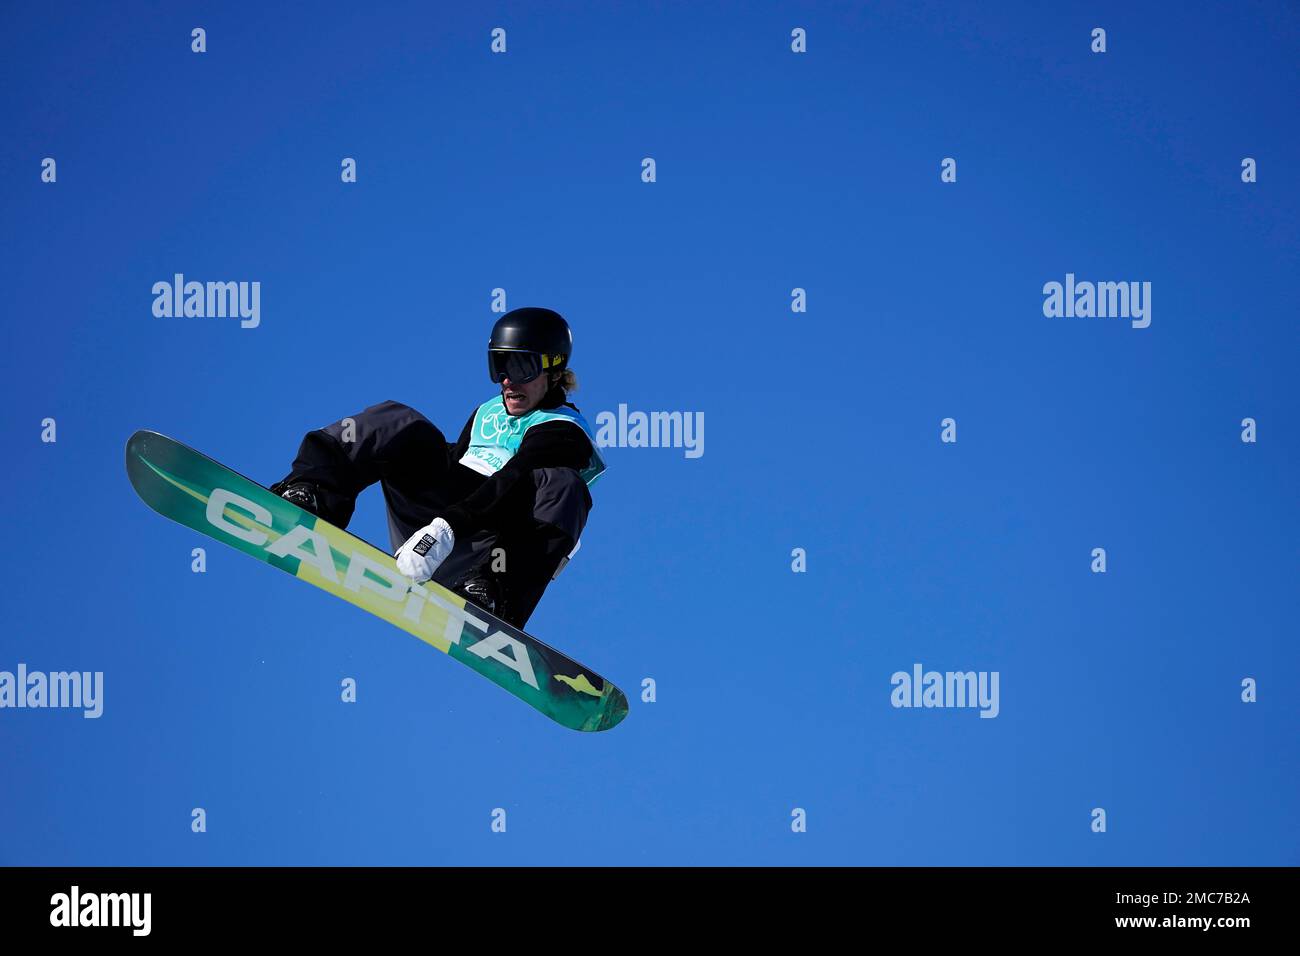 Tiarn Collins of New Zealand competes during the mens snowboard big air qualifications of the 2022 Winter Olympics, Monday, Feb. 14, 2022, in Beijing